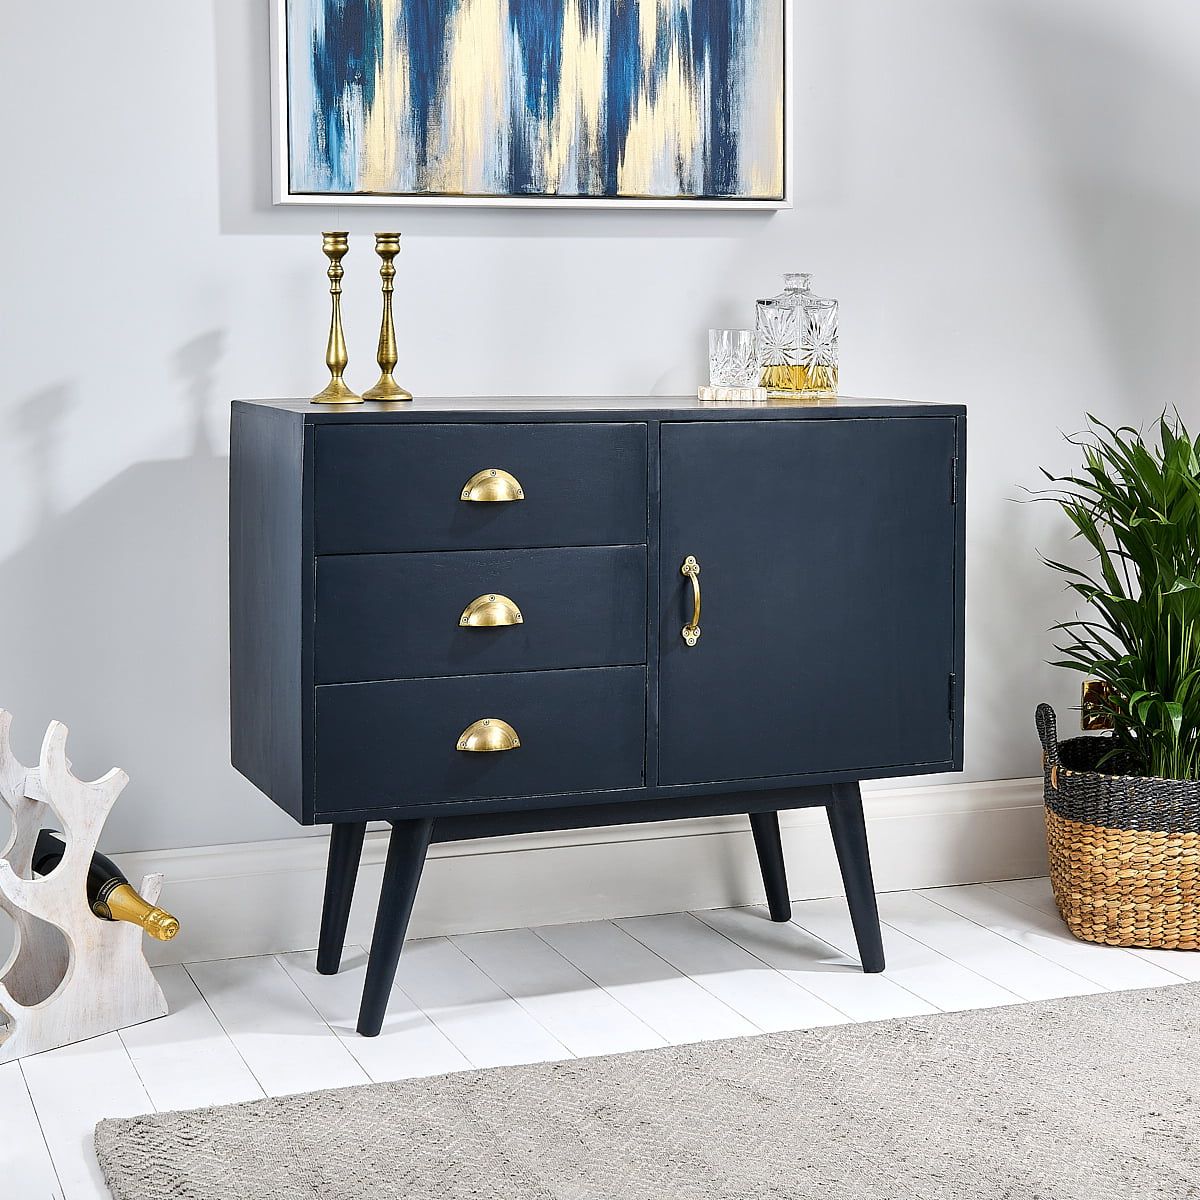 Antique Blue Sideboard Navy – Ellie – Zaza Homes Intended For Preferred Navy Blue Sideboards (View 3 of 10)